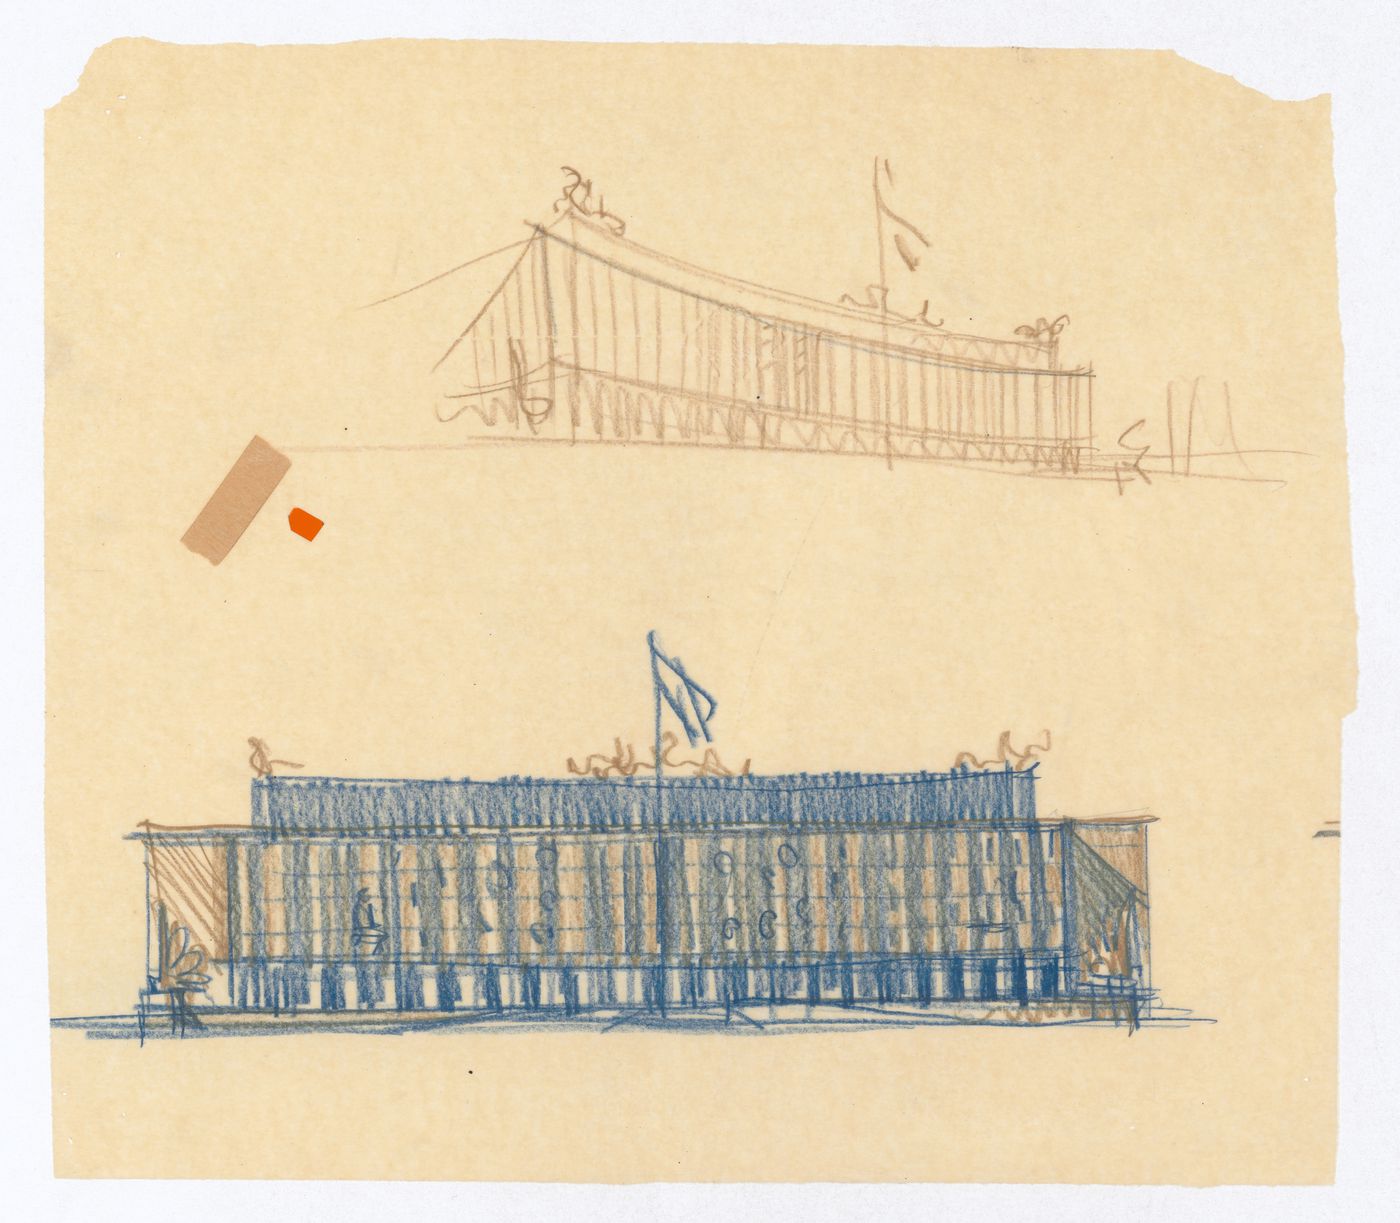 Sketched perspective and elevation, United States Chancellery Building, London, England